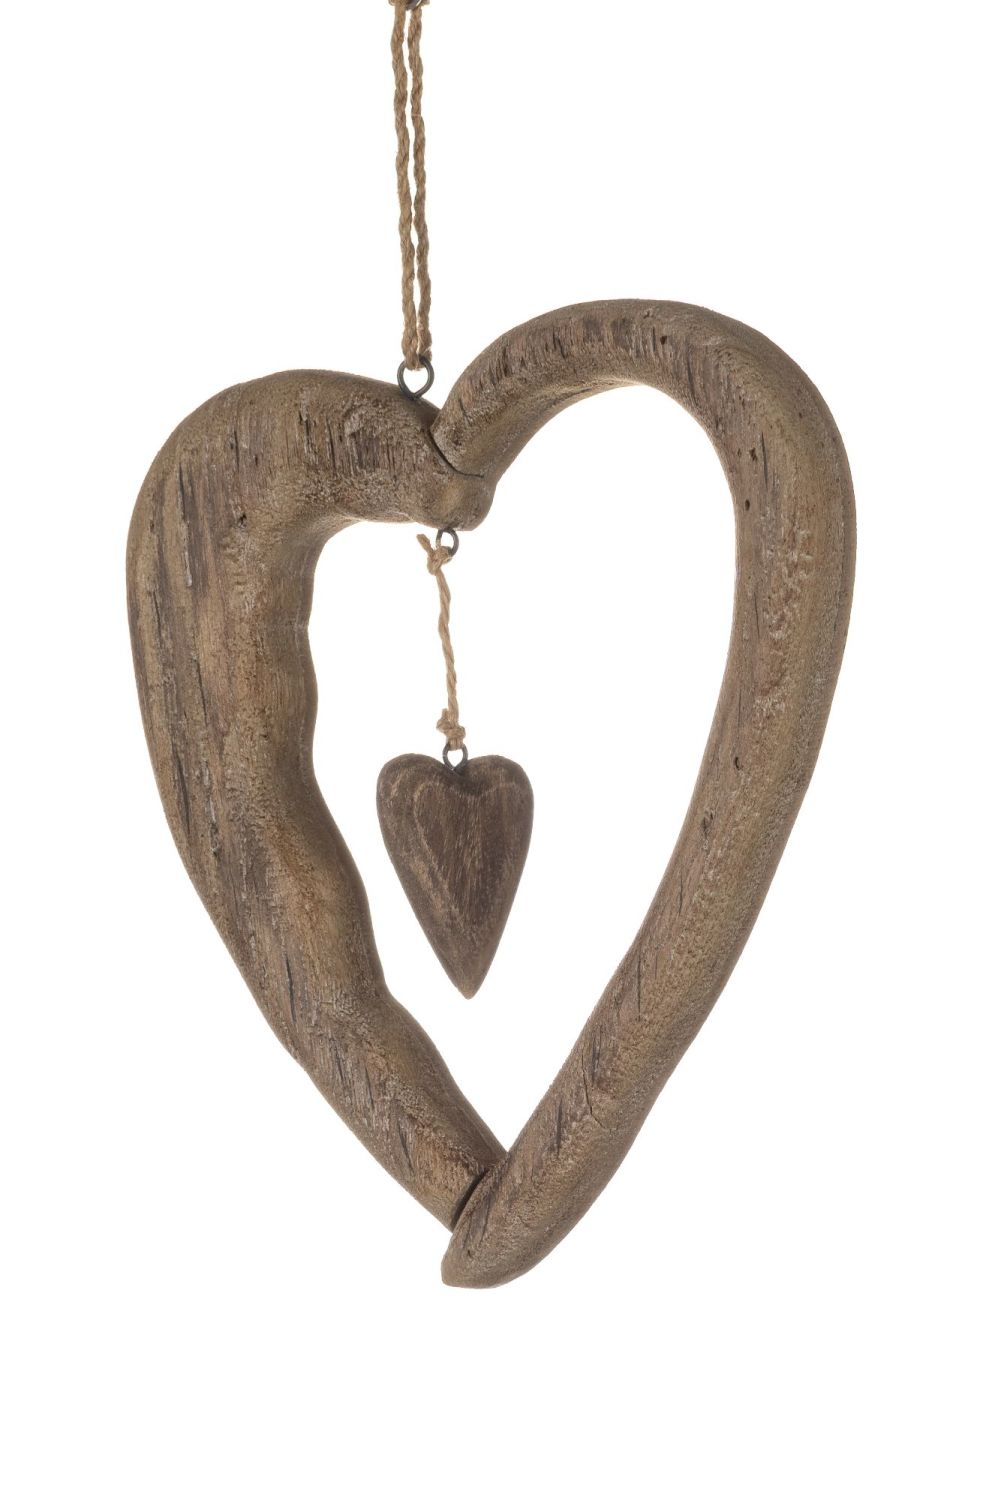 Wooden Heart within a Heart Hanging Decoration